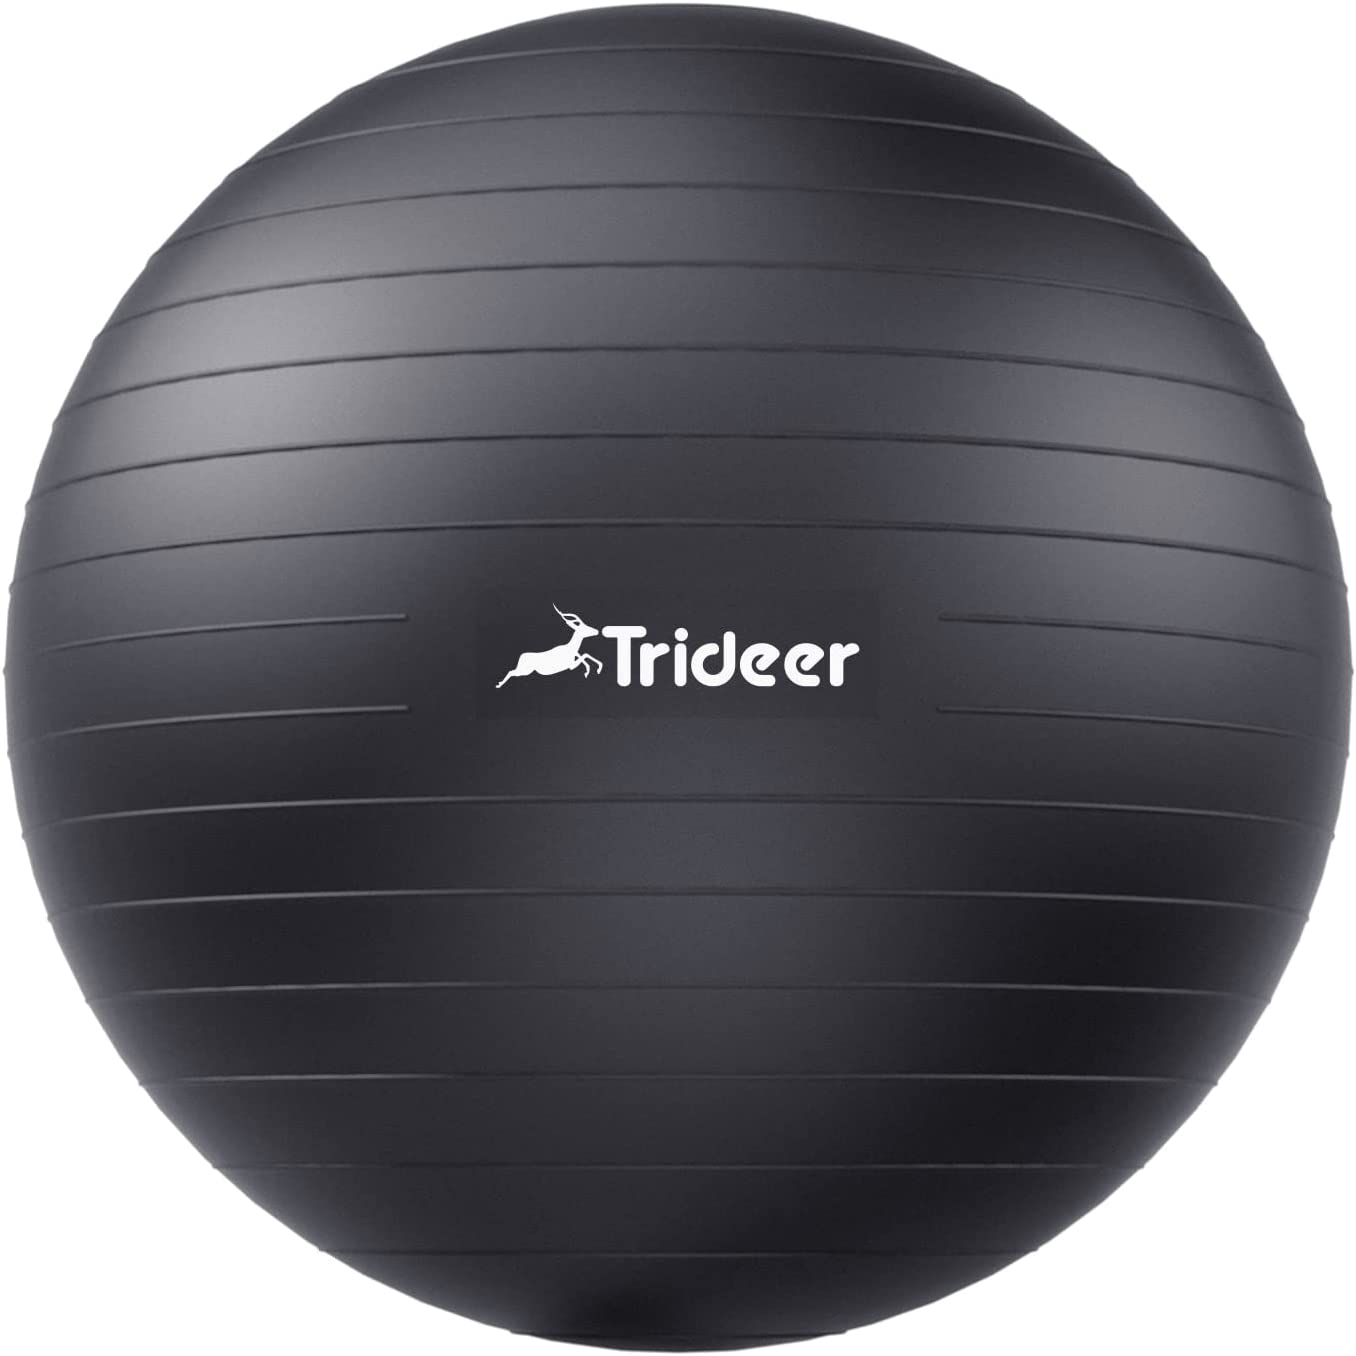 exercise ball gift idea for mother's day